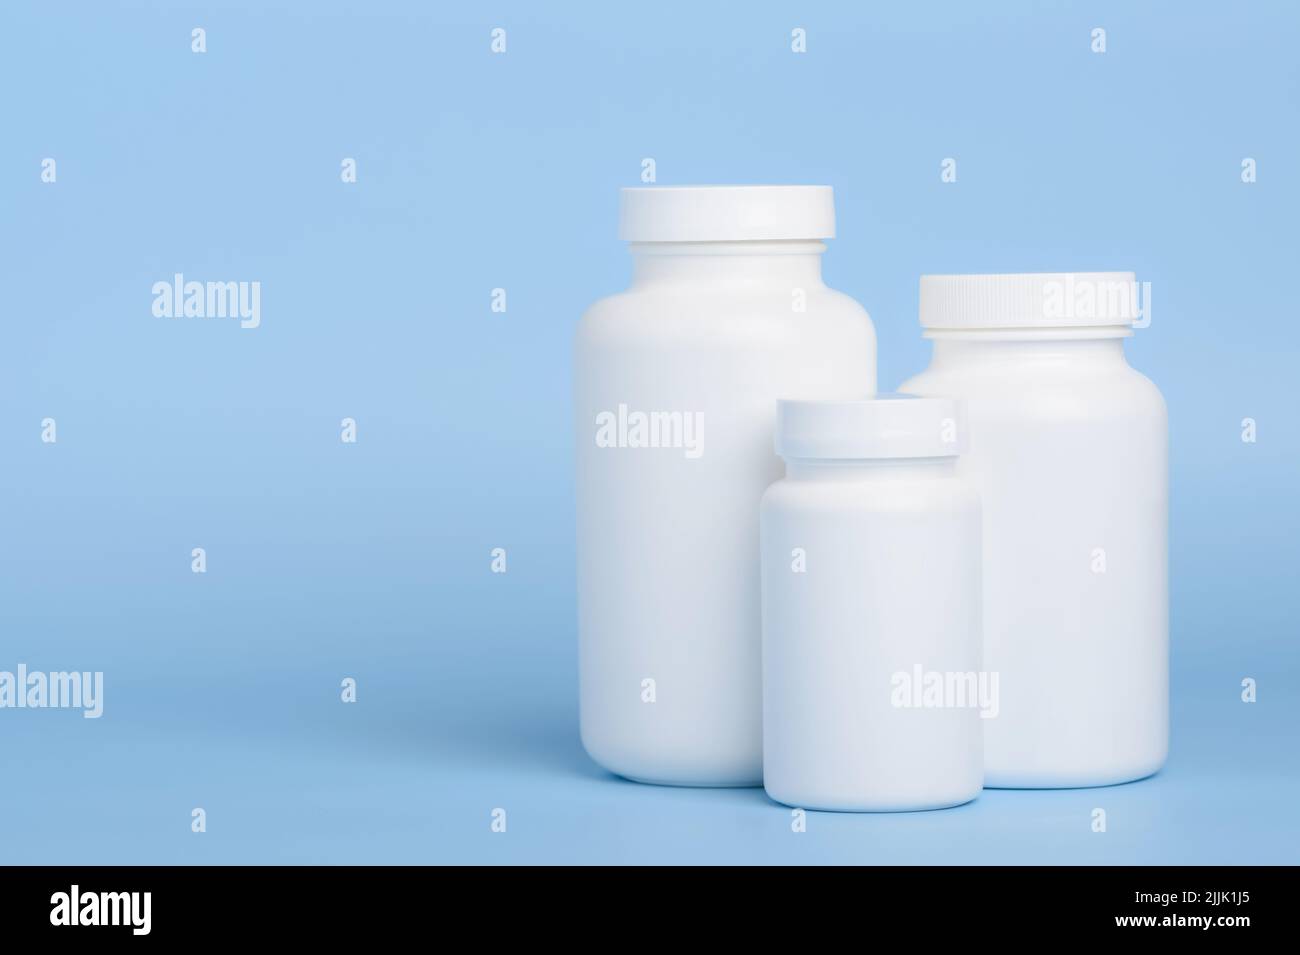 Three blank white plastic bottles of medicine pills or supplements on blue background with side copy-space Stock Photo